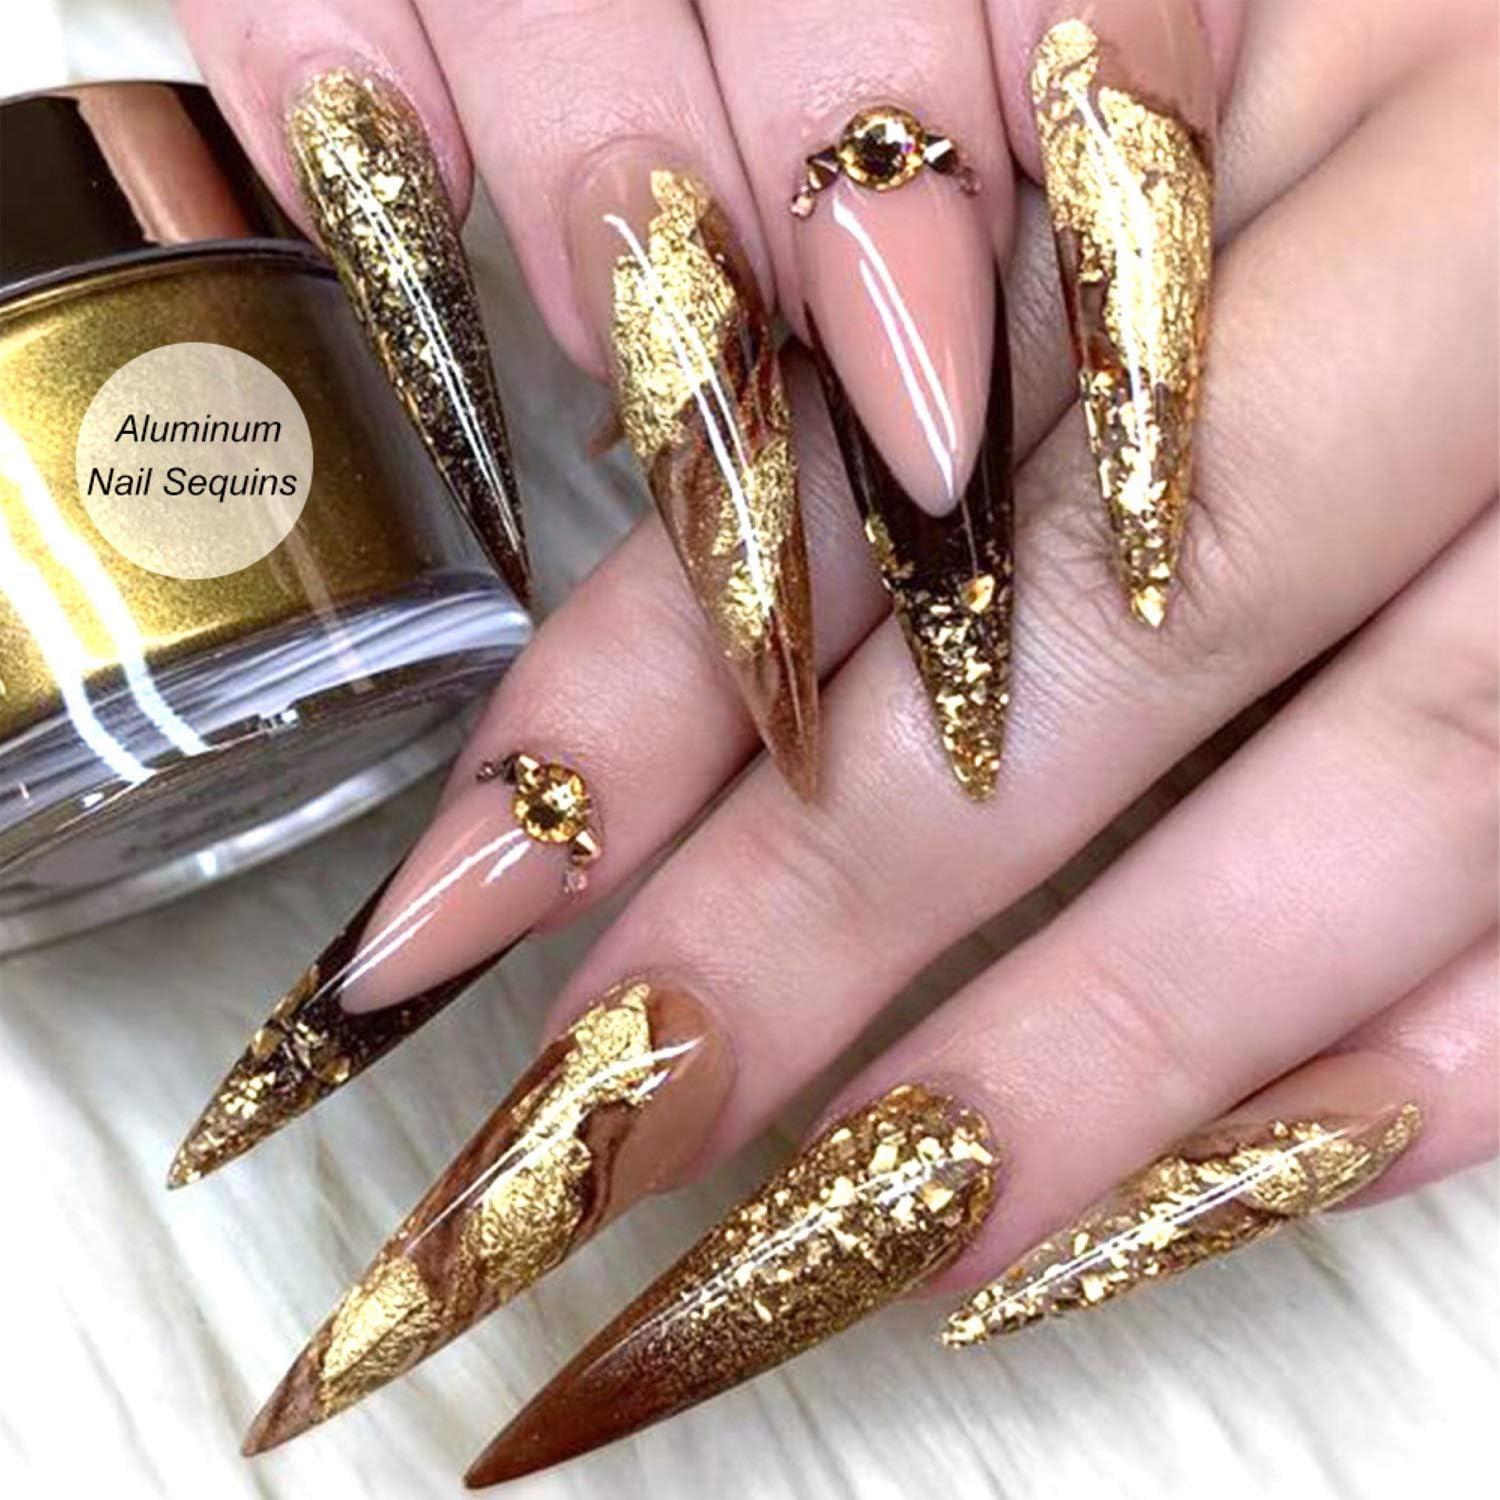 Gold Foil Nail Art Set, Nail Art Decals Stickers Fragments Nail Foil Art Nail Charms, DIY Manicure Nails Design Decal Decoration Gold Silver Leaf